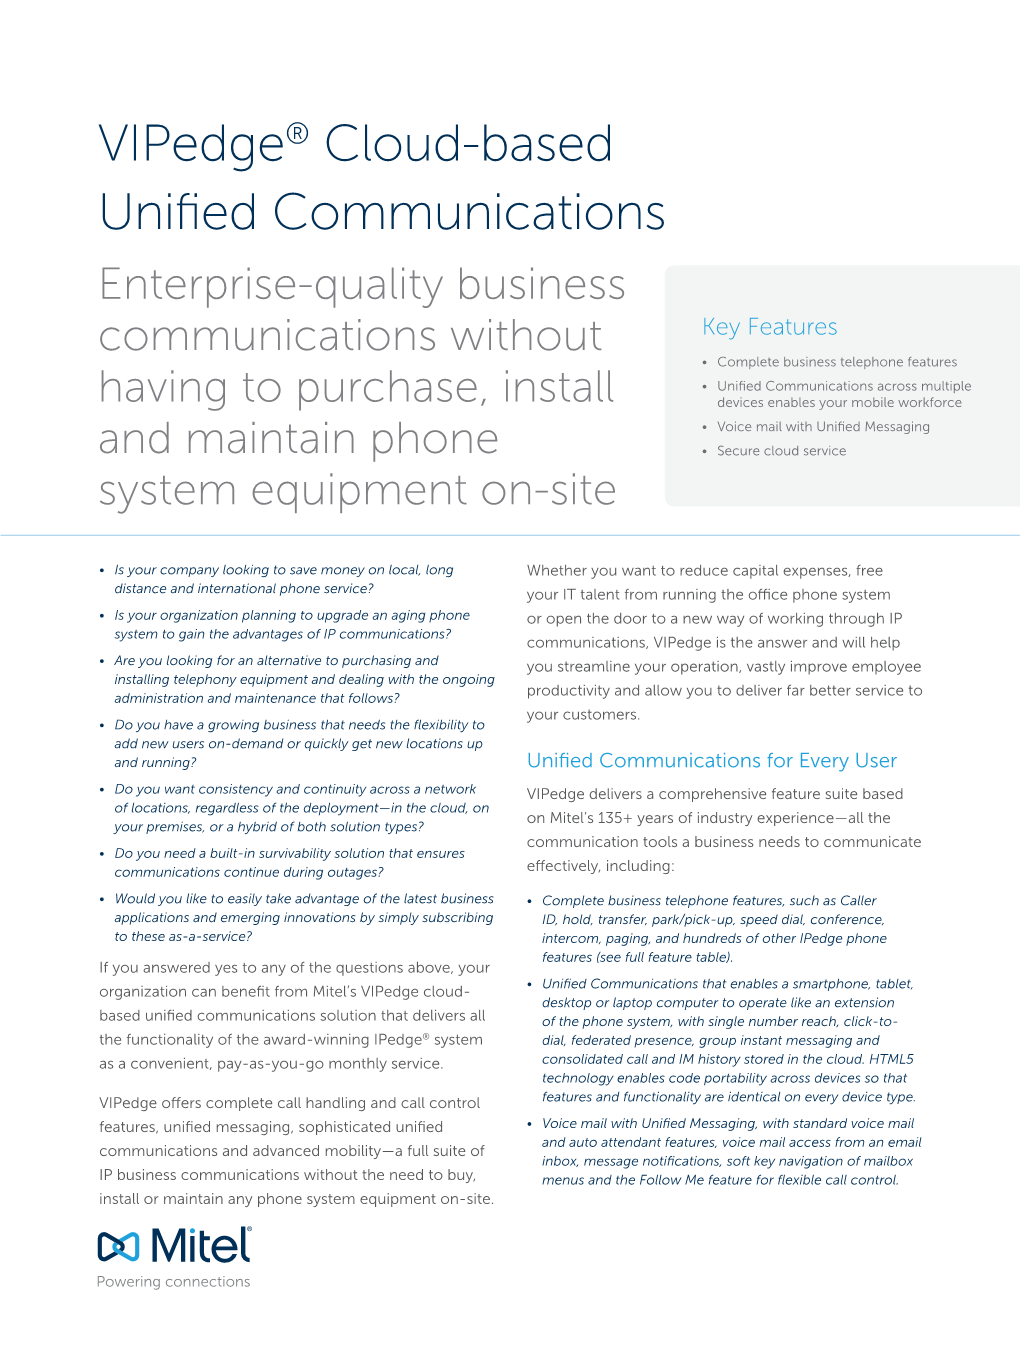 Vipedge® Cloud-Based Unified Communications